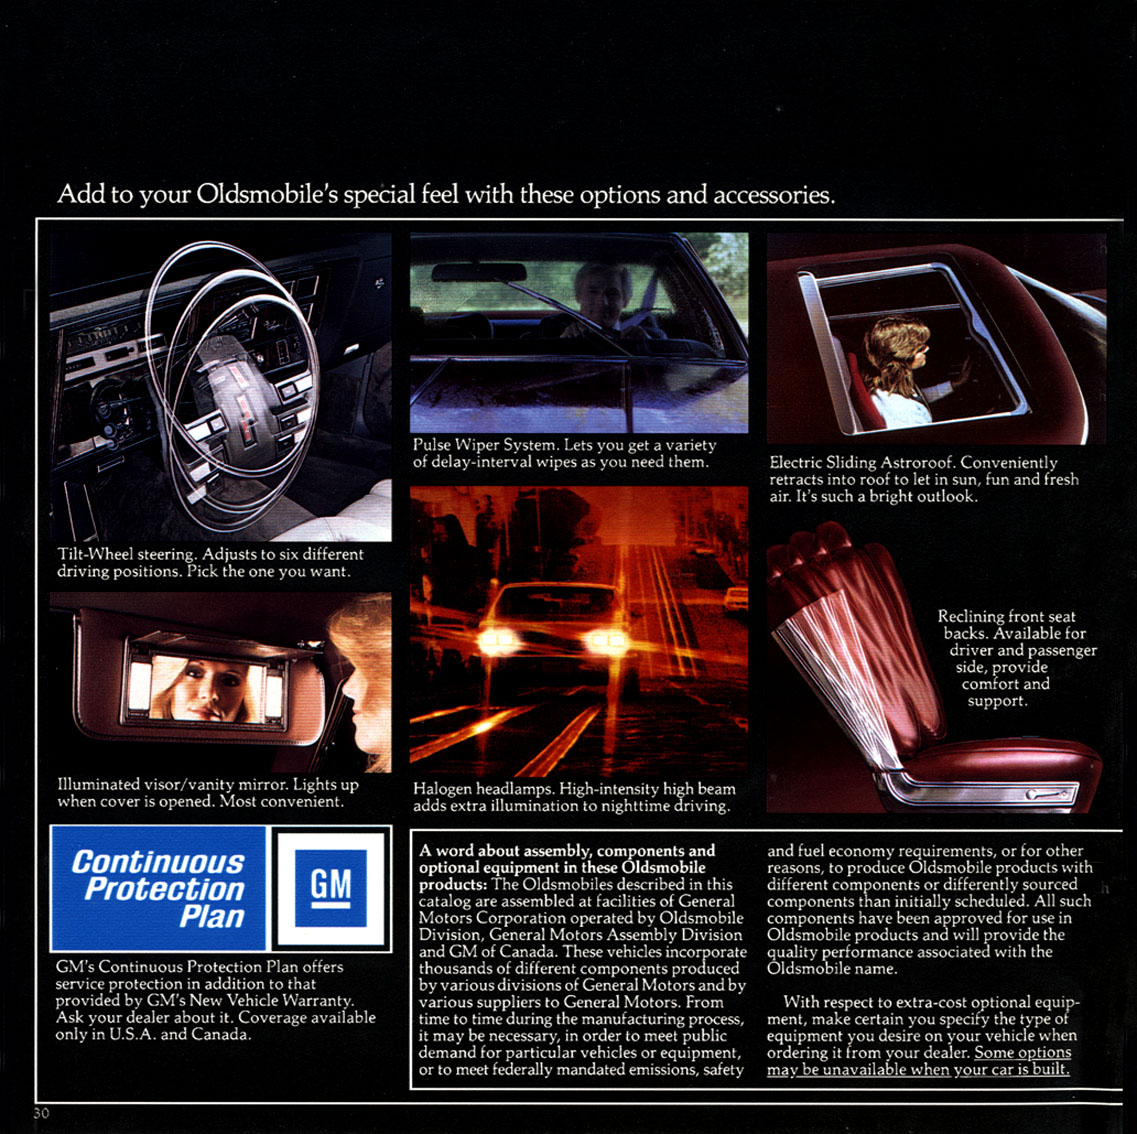 1984 Oldsmobile Full-Size Brochure Page 3